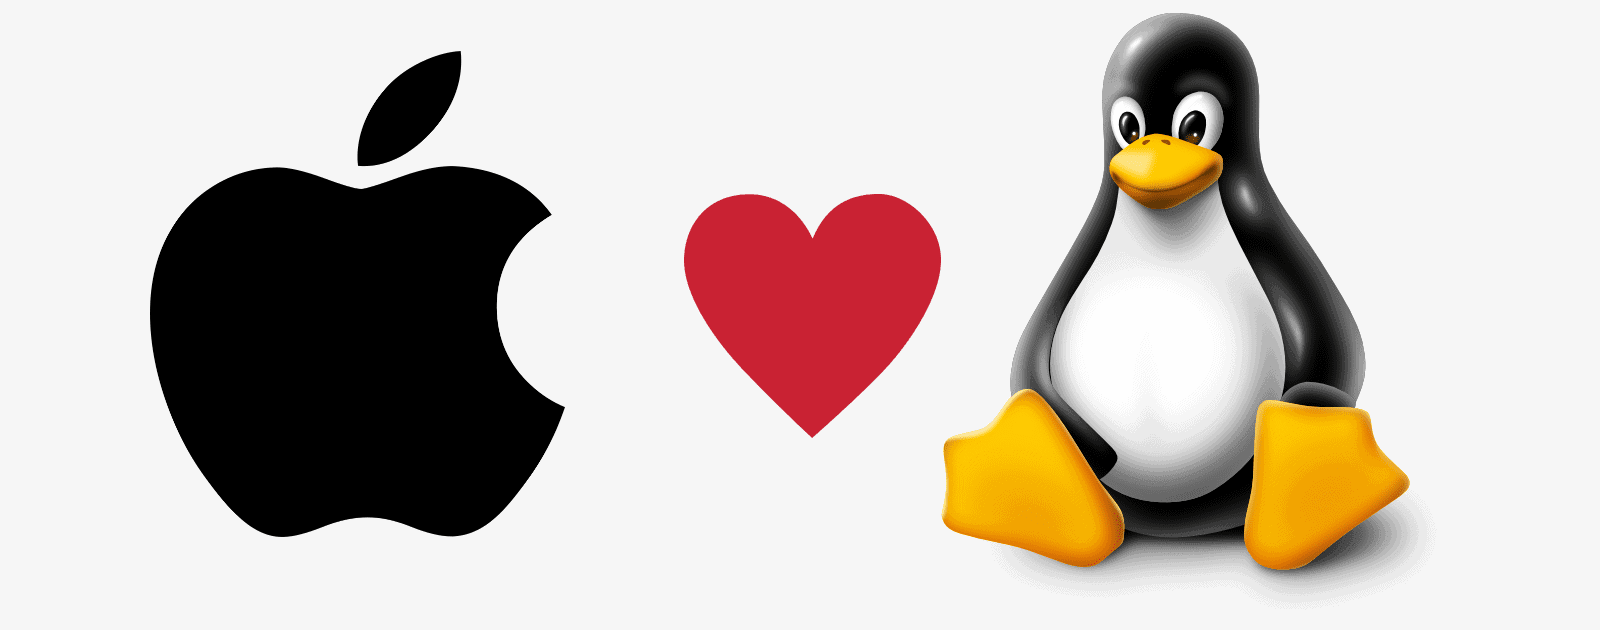 Apple is looking for Linux kernel developers. Image of Apple logo, heart, and Tux the penguin.